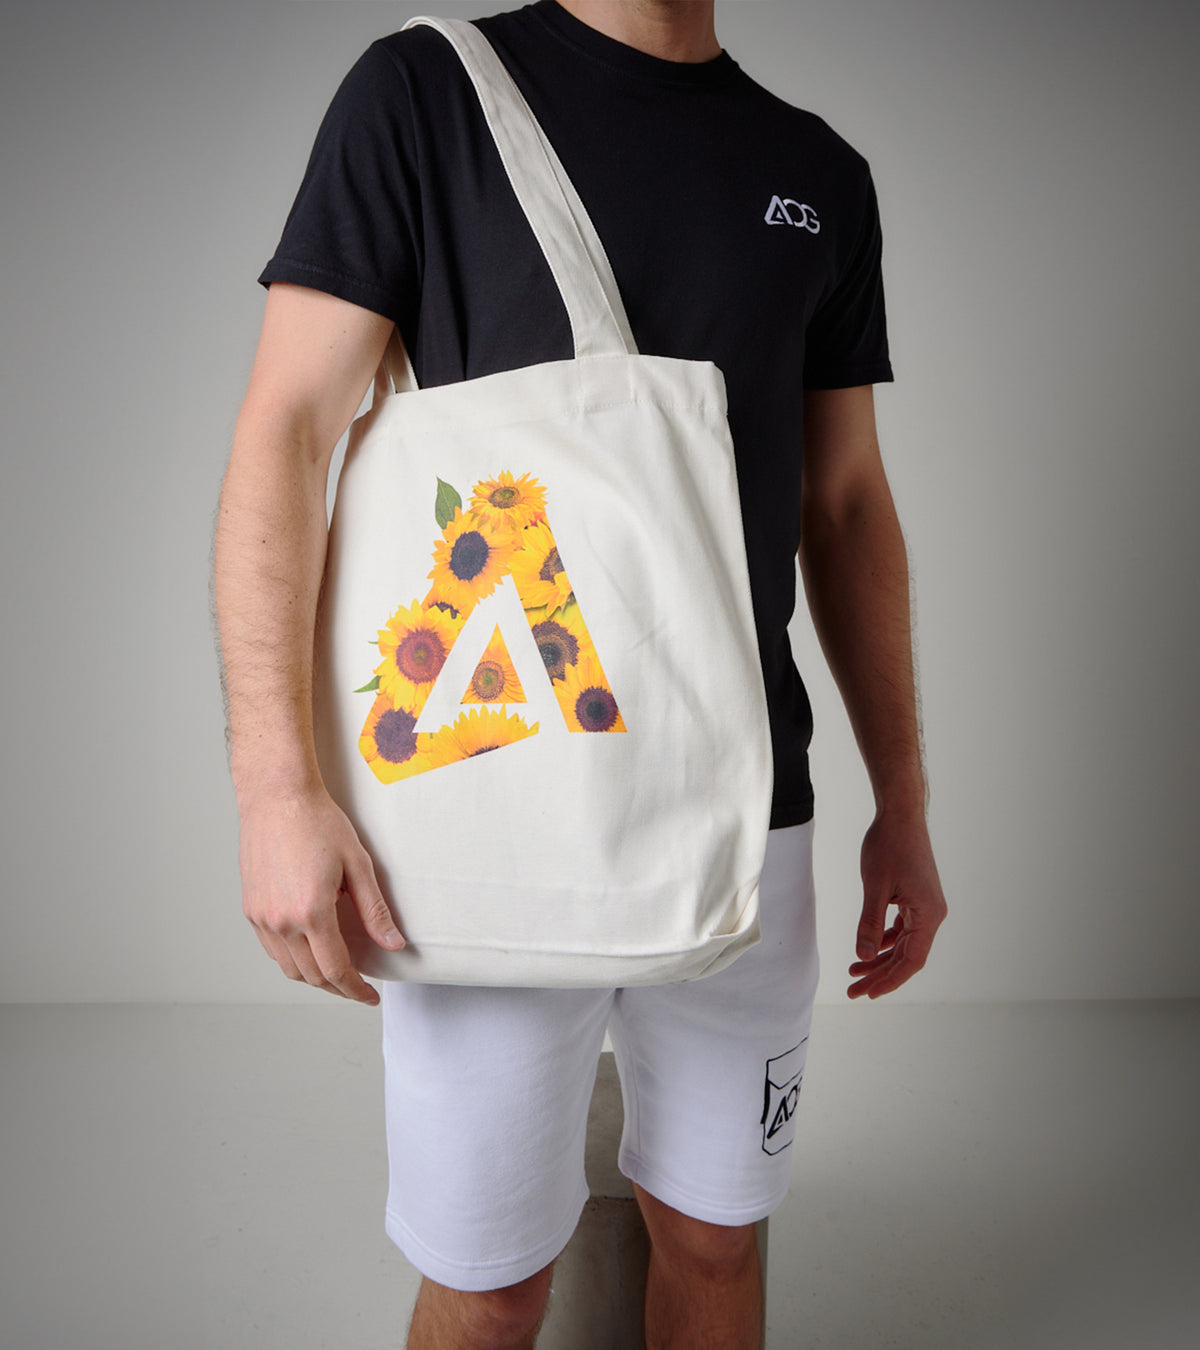 Cotton Tote Bag - Sunny side